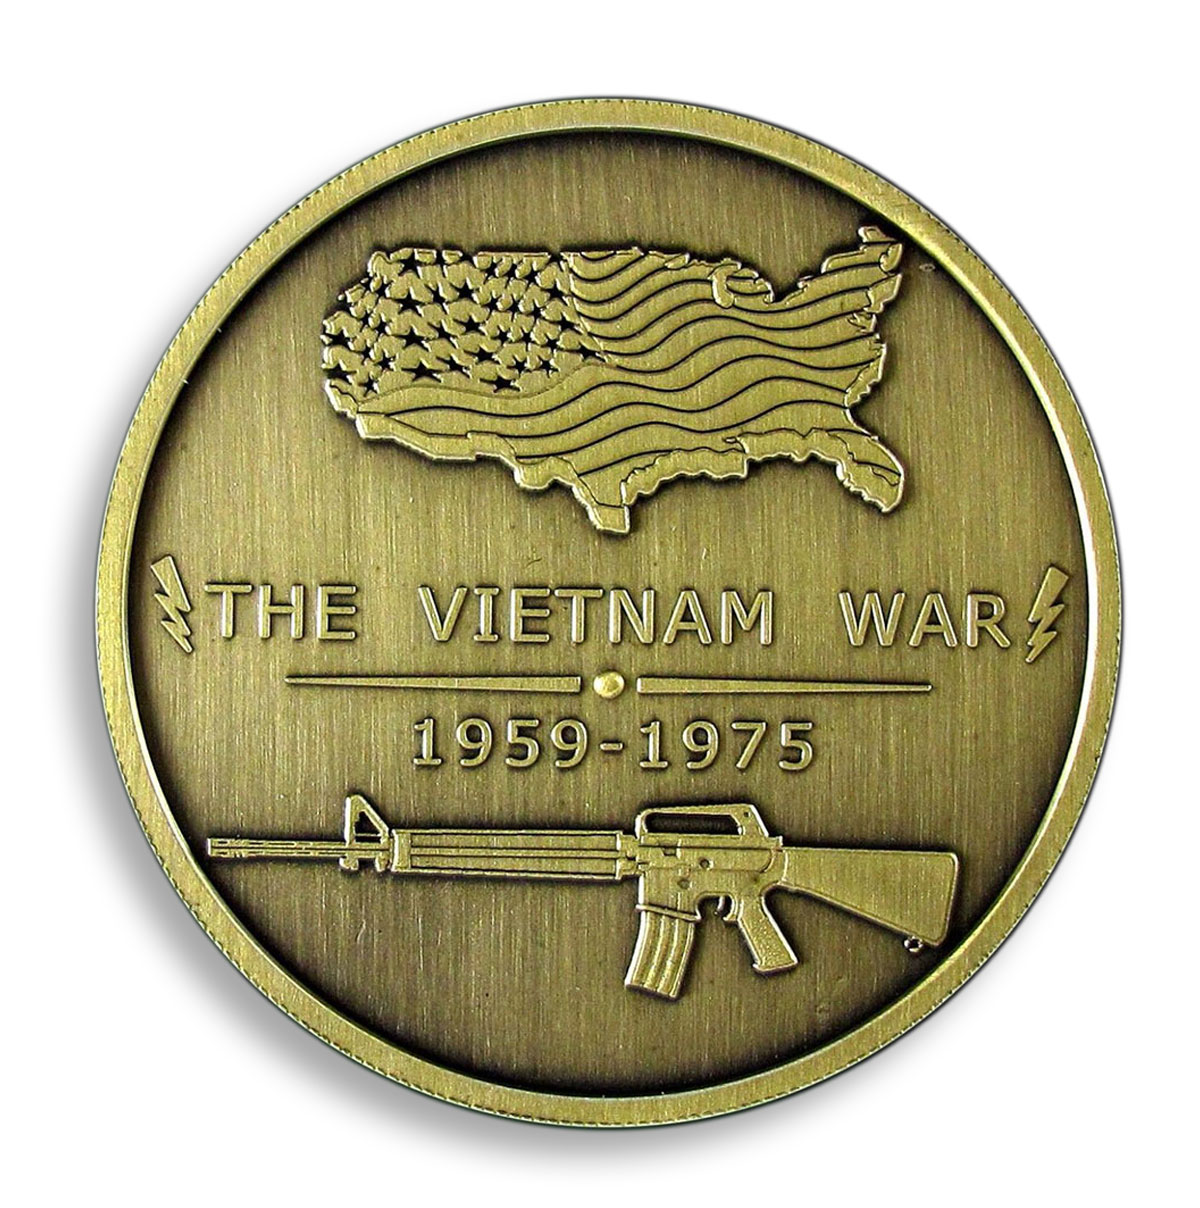 US Army, Vietnam War, Tank, Helicopter, Honor, Military, Duty, Courage, Souvenir